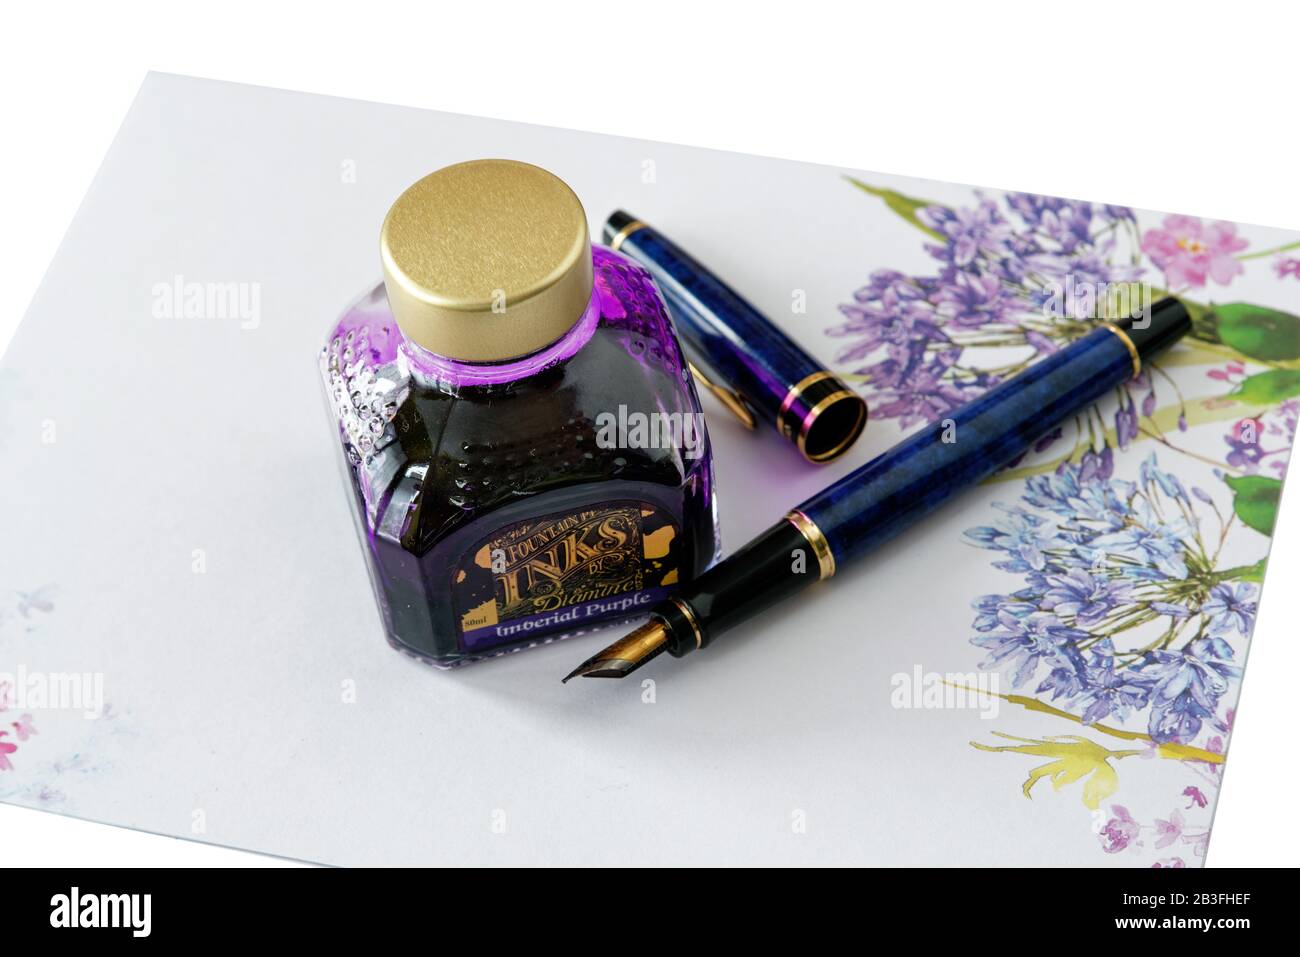 Fountain pen and a bottle of ink Stock Photo